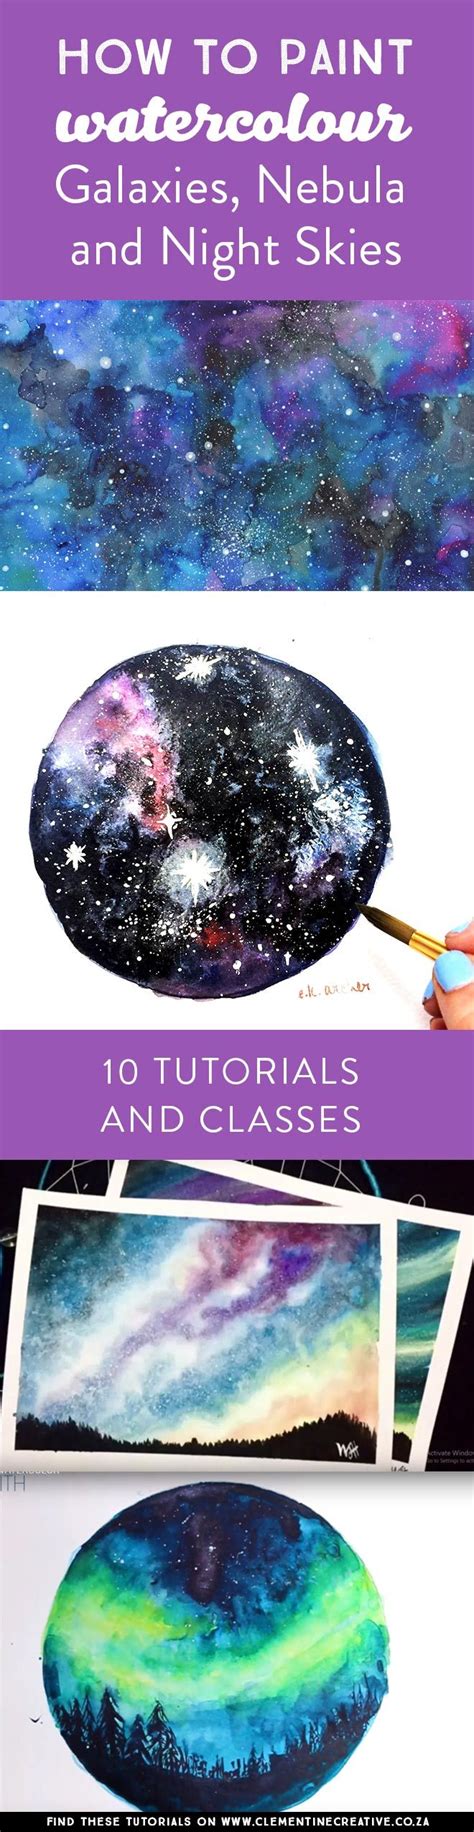 Ever Wanted To Learn How To Paint A Galaxy Night Sky Or Nebula With